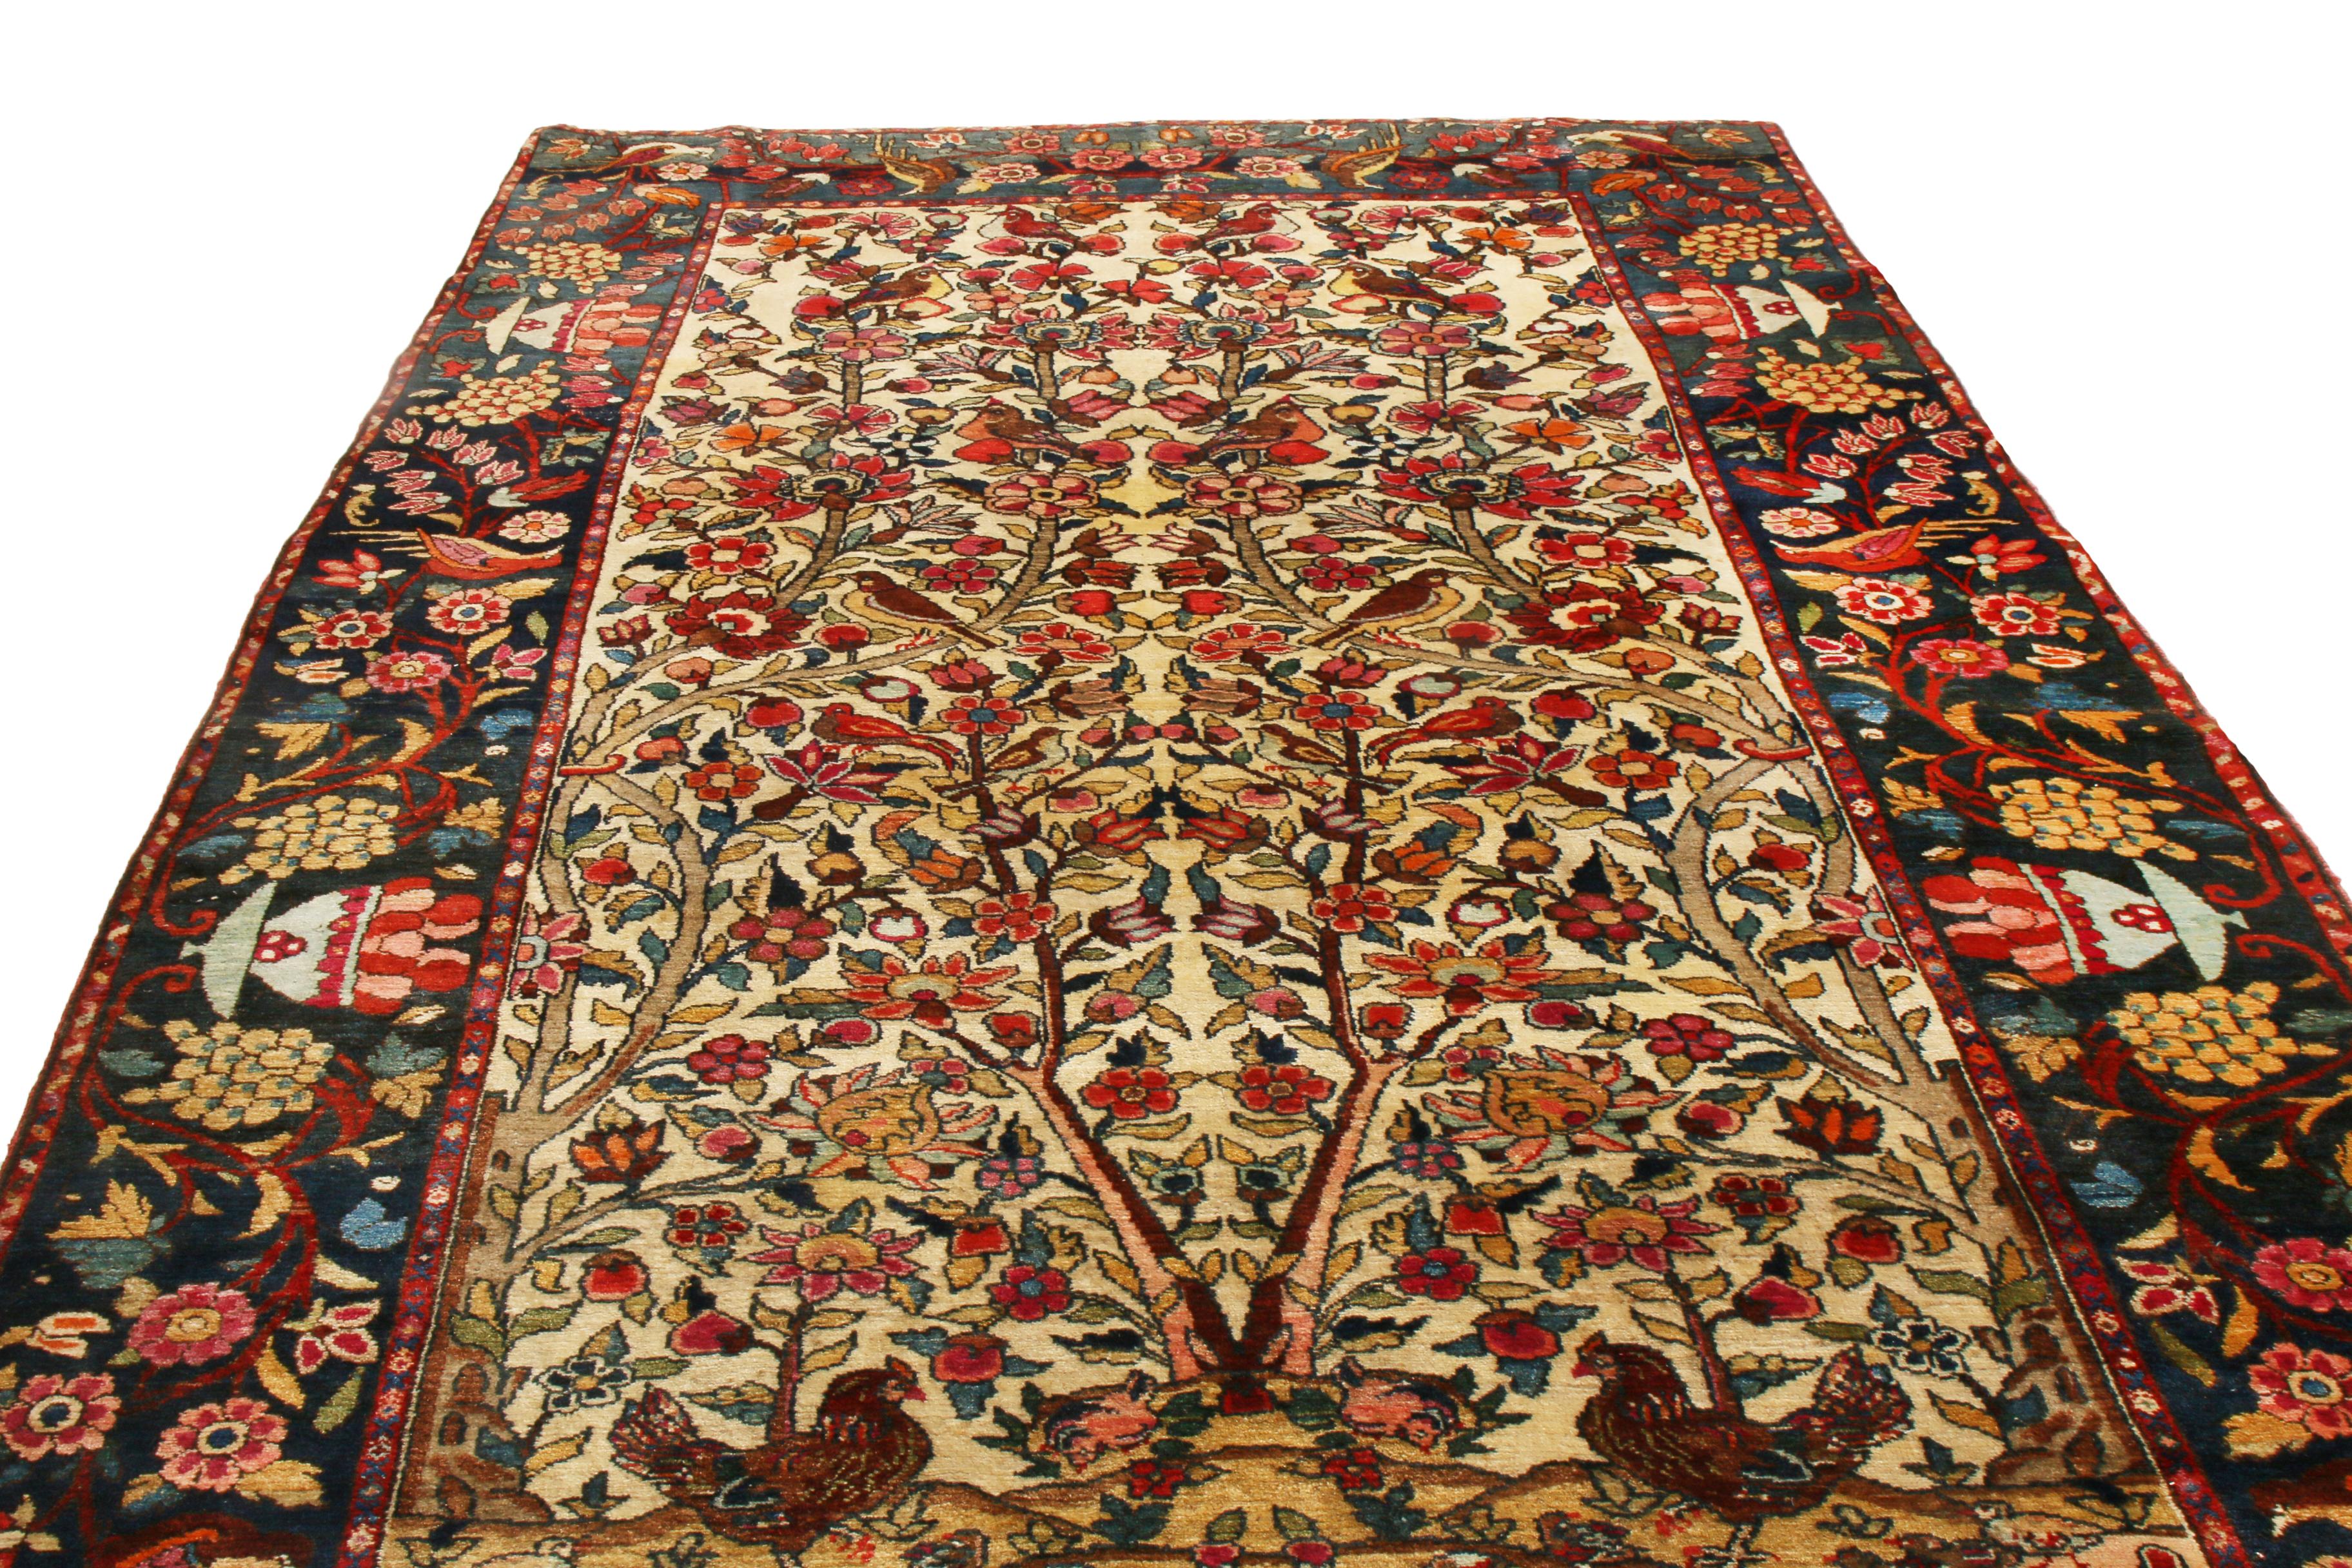 Originating from Persia between 1880-1890, this antique traditional Bakhtiari Persian rug enjoys one of the most highly stylized all-over patterns of its era. Hand knotted in high quality, luminous wool, the field and border alike portray a series